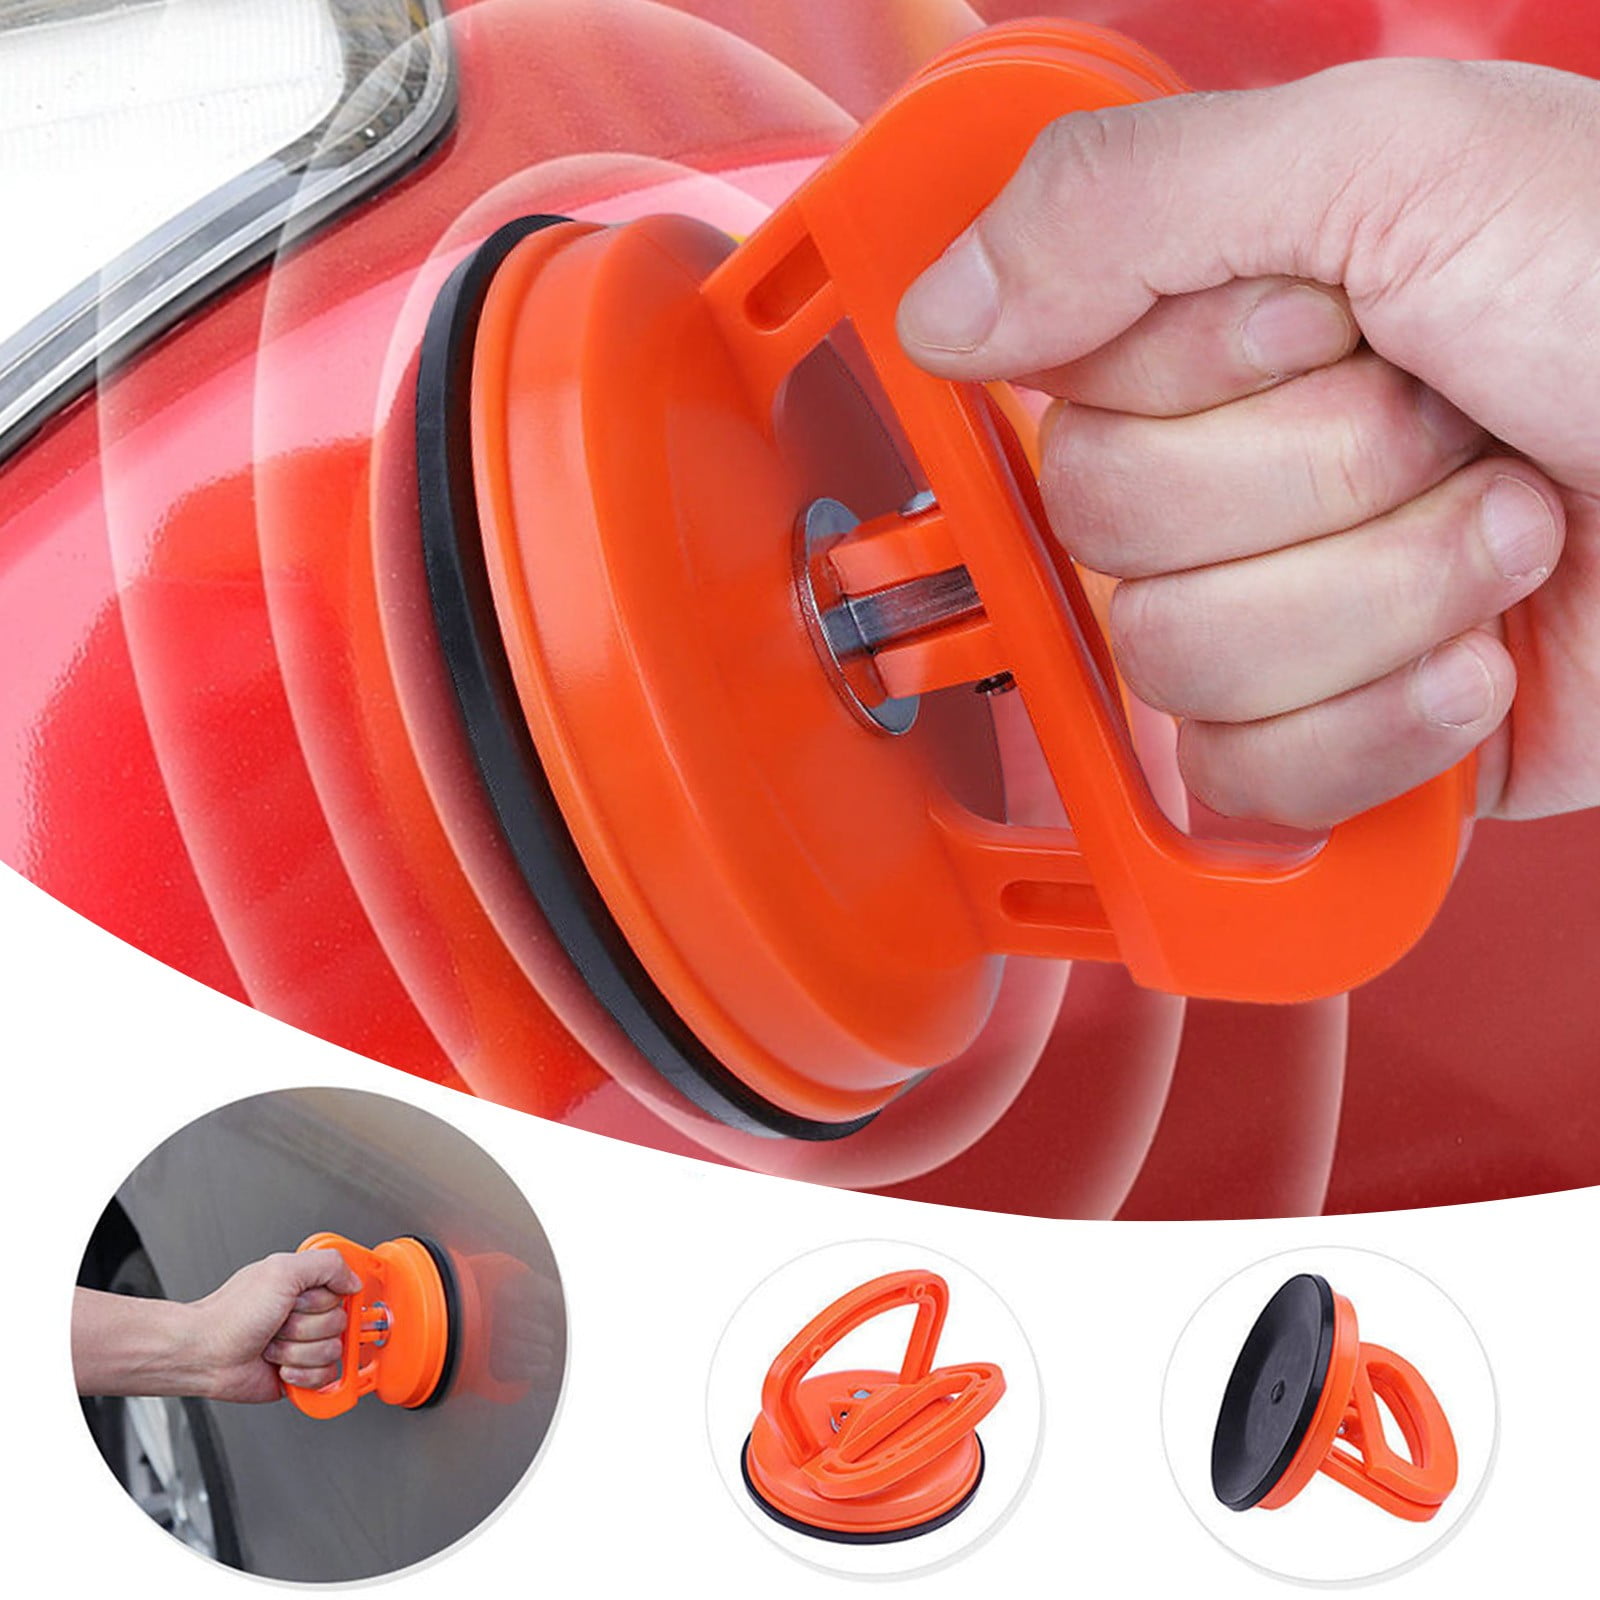 Evjurcn Car Dent Puller, 2Pcs 154/33LB Auto Small Dent Remover Powerful  Suction Cup Handle Lifter Portable Vehicle Dent Sucker Car Body Dent Repair  Tool for Glass Tiles Mirror 